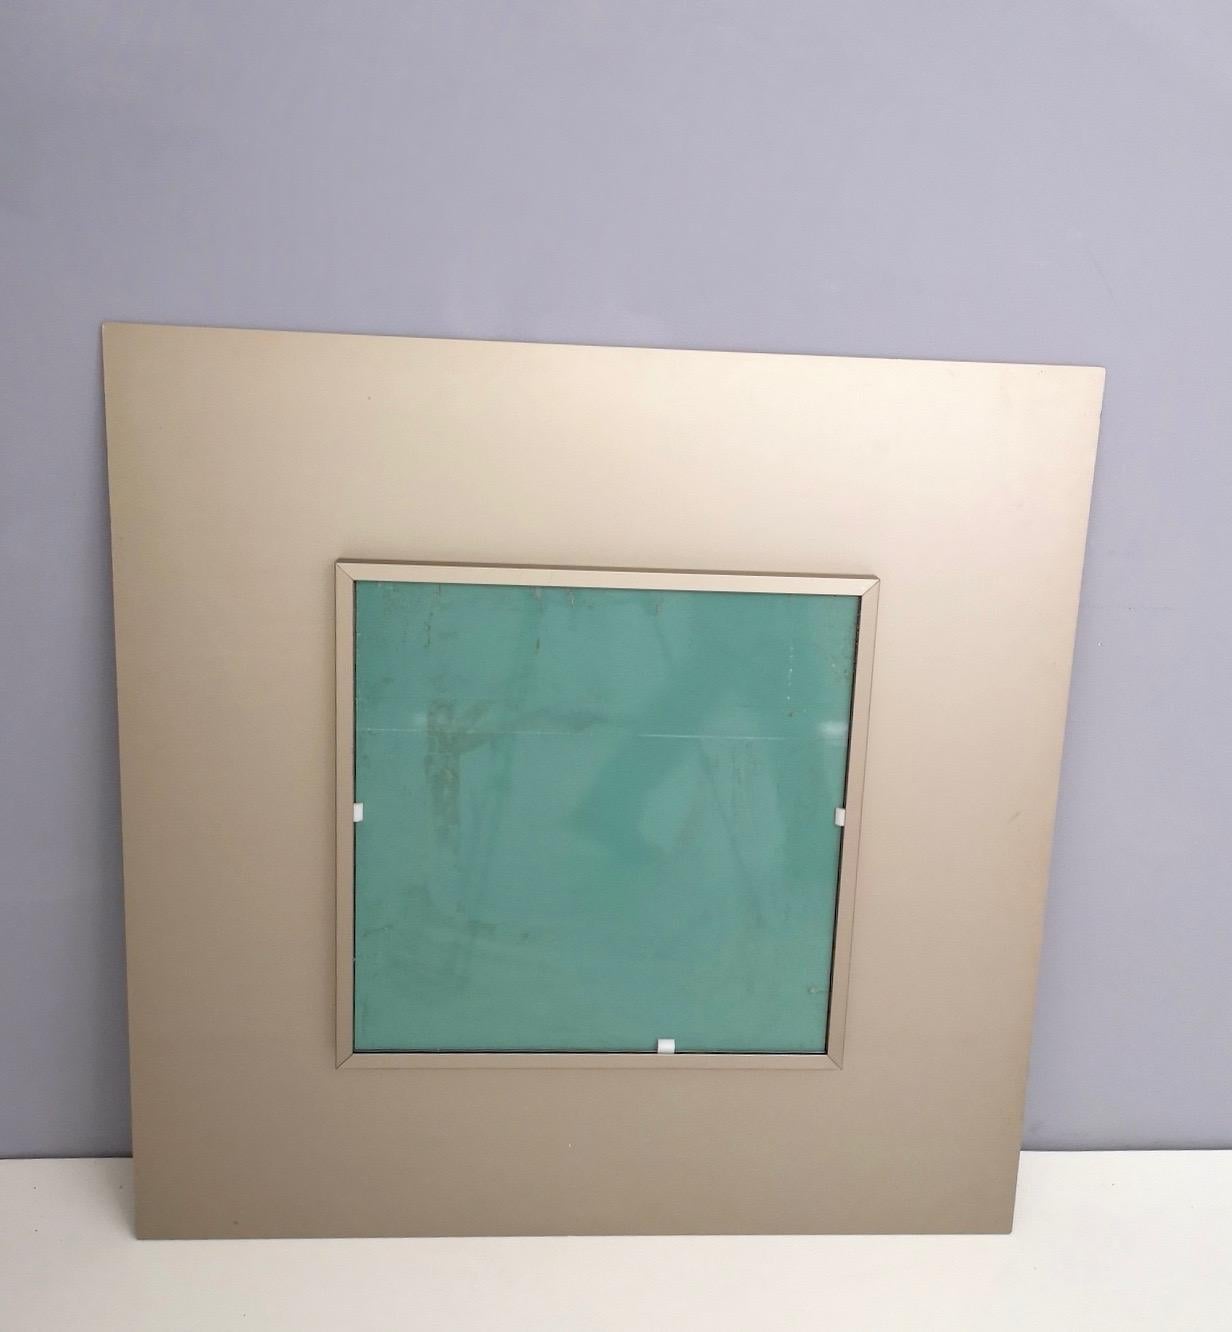 Postmodern Square Wall Mirror with Floral Motifs on Beige Metal Frame, Italy In Good Condition For Sale In Bresso, Lombardy